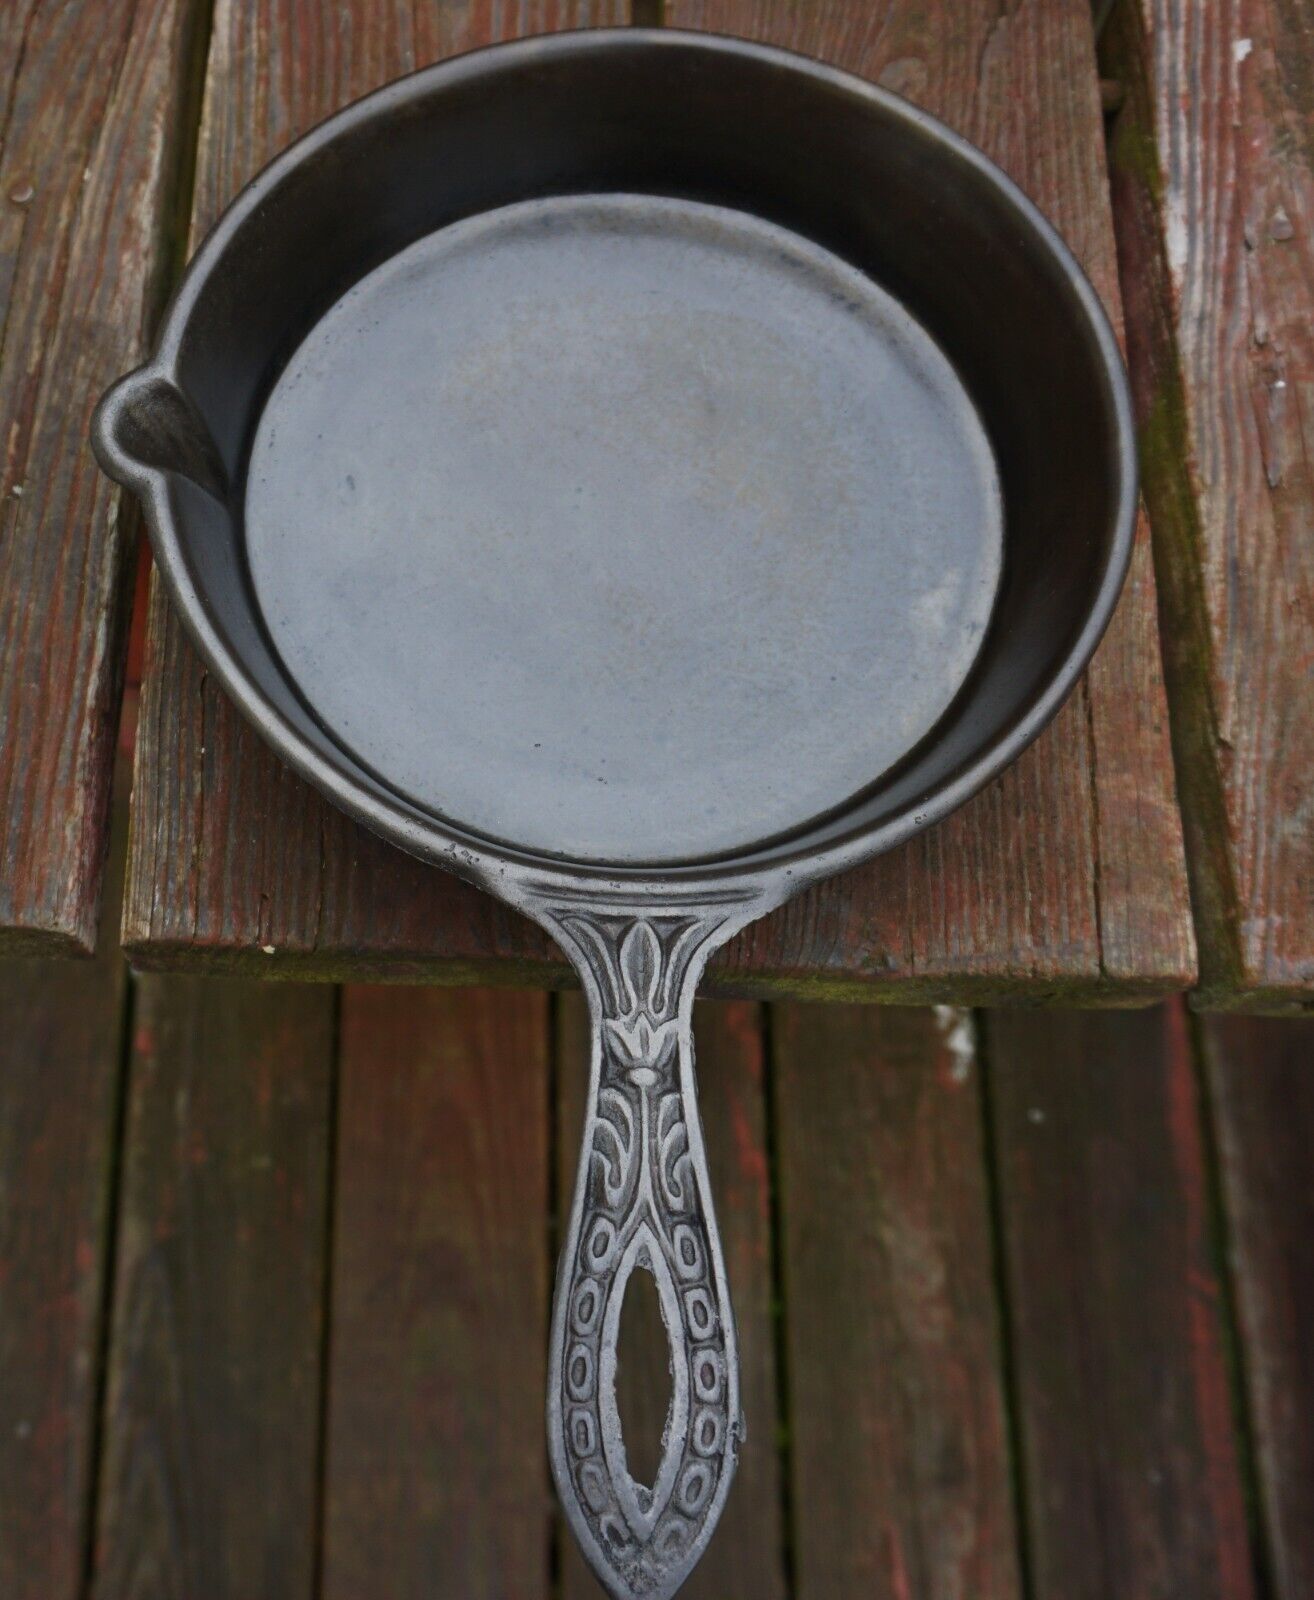 RARE NO. 8 FANCY HANDLE 1800'S CAST IRON SKILLET WITH TULIP HANDLE & GATE MARK